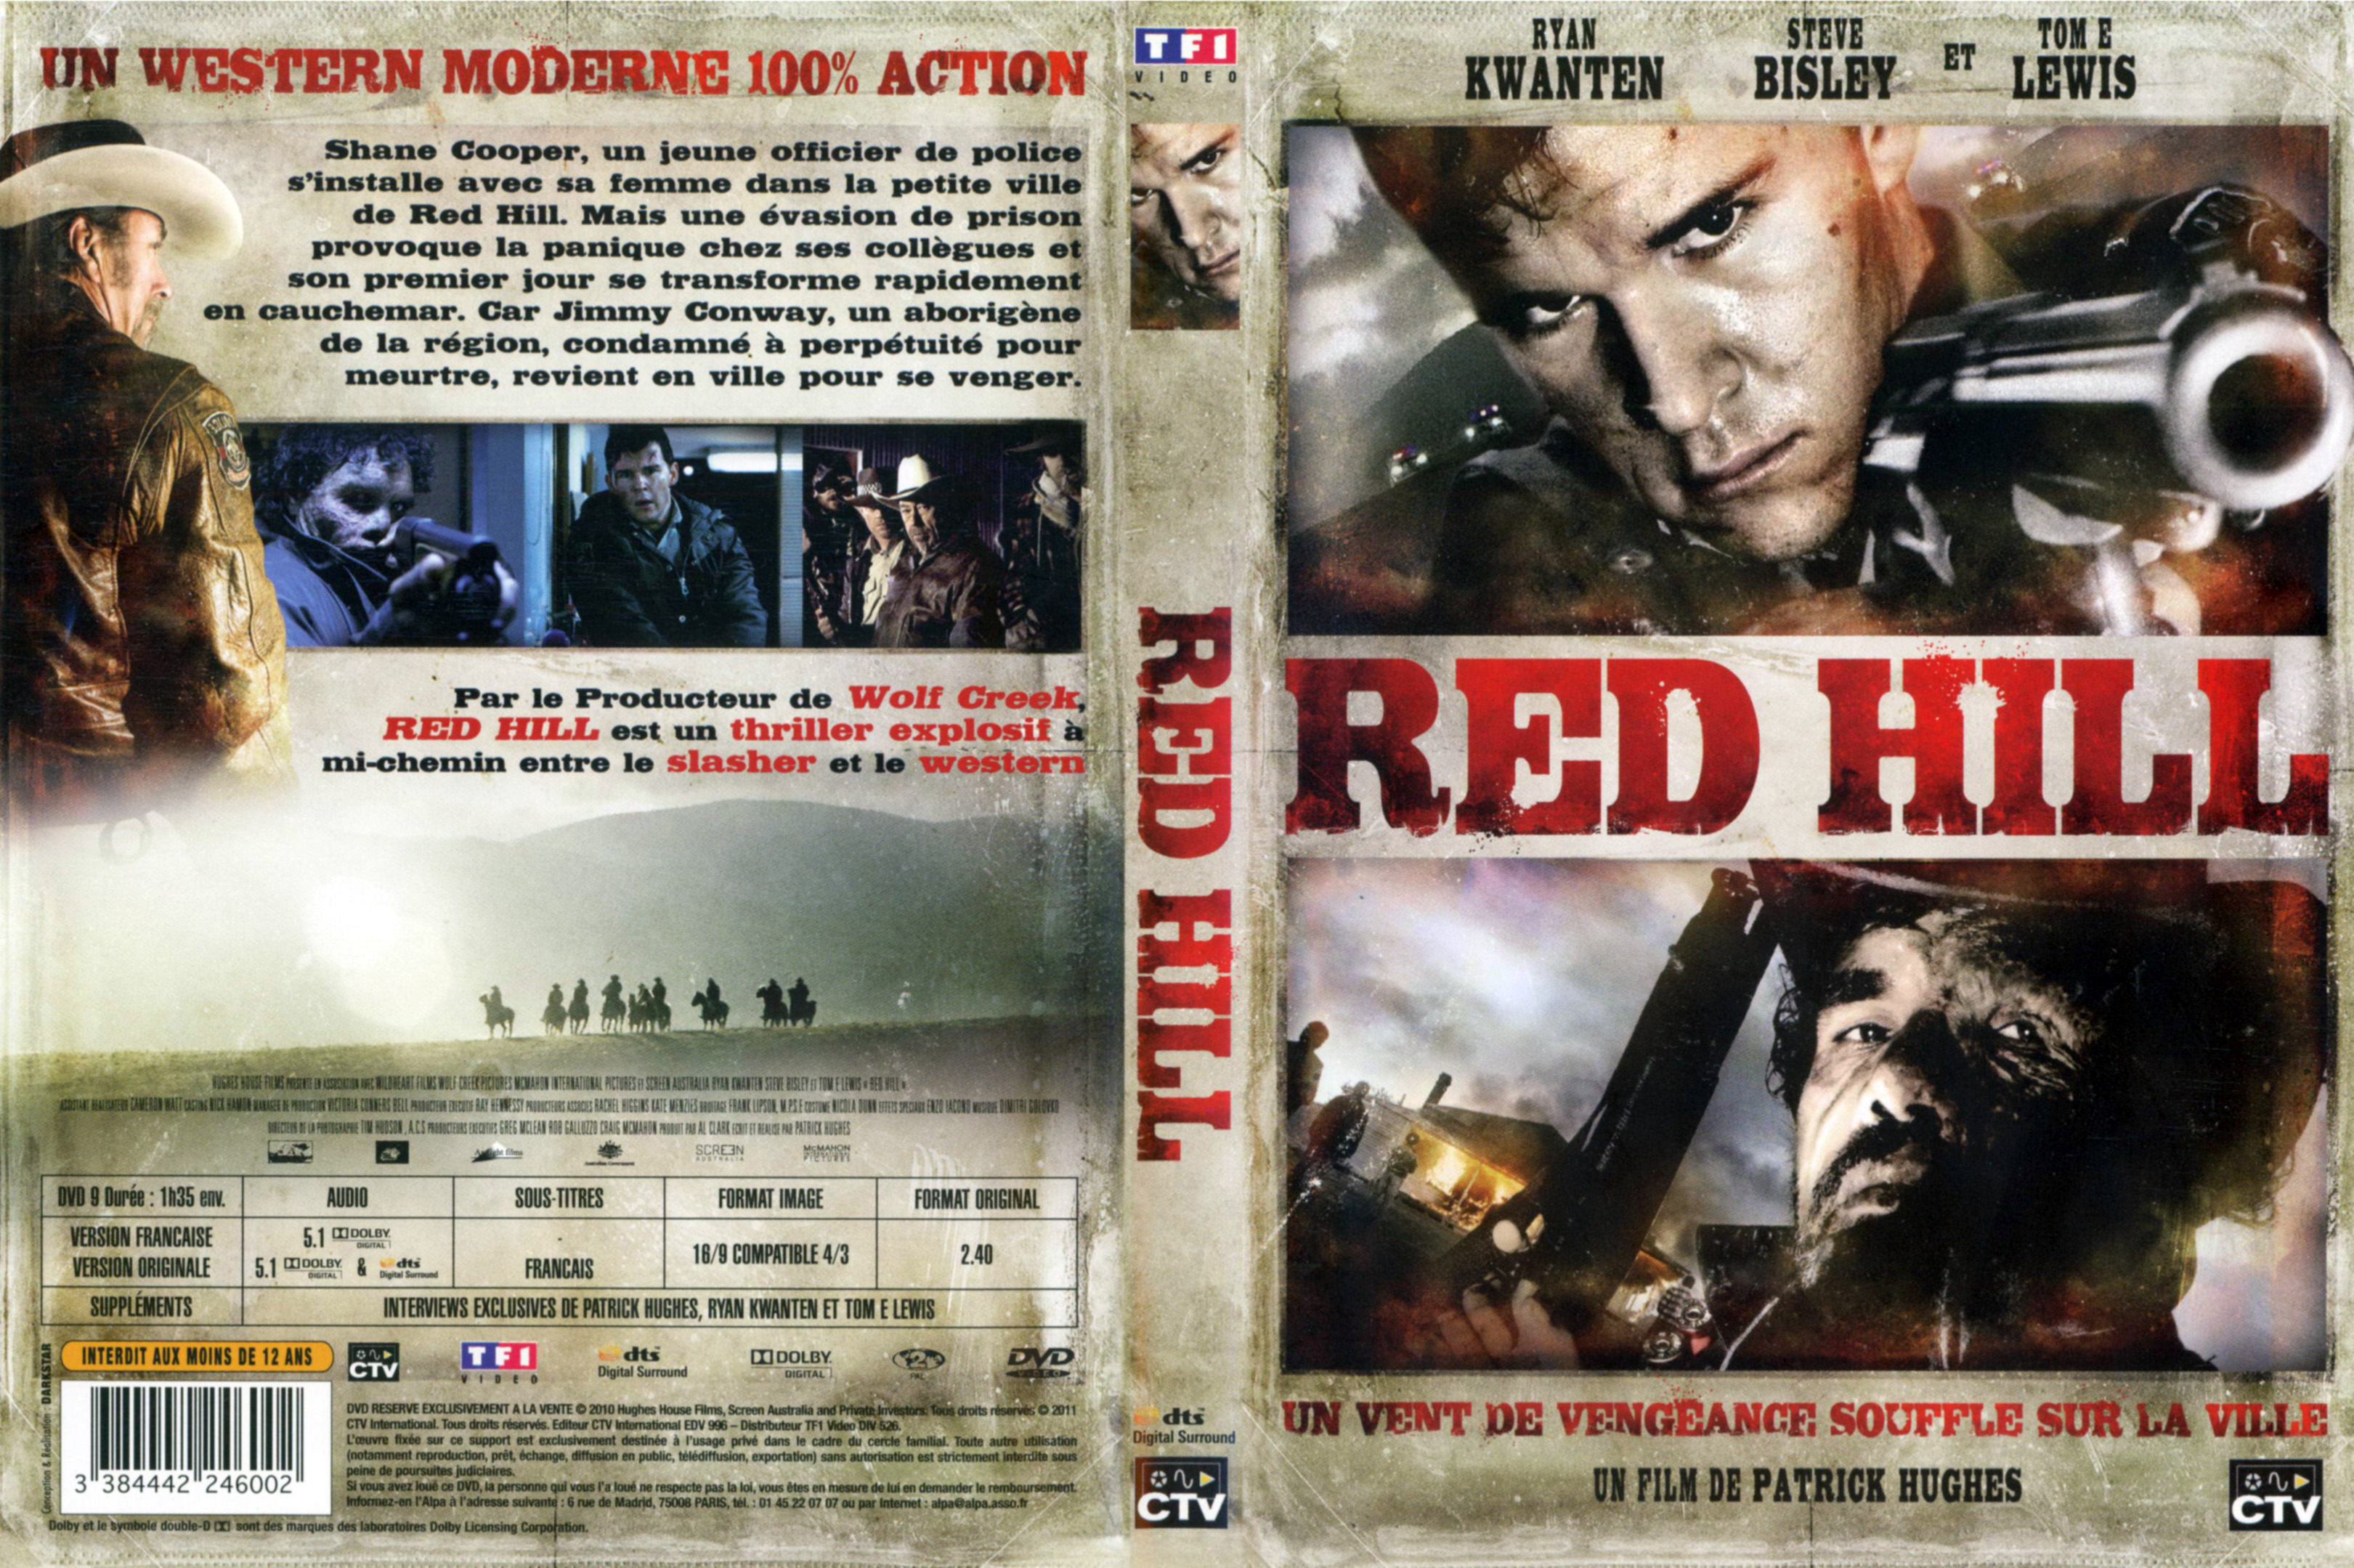 Jaquette DVD Red hill